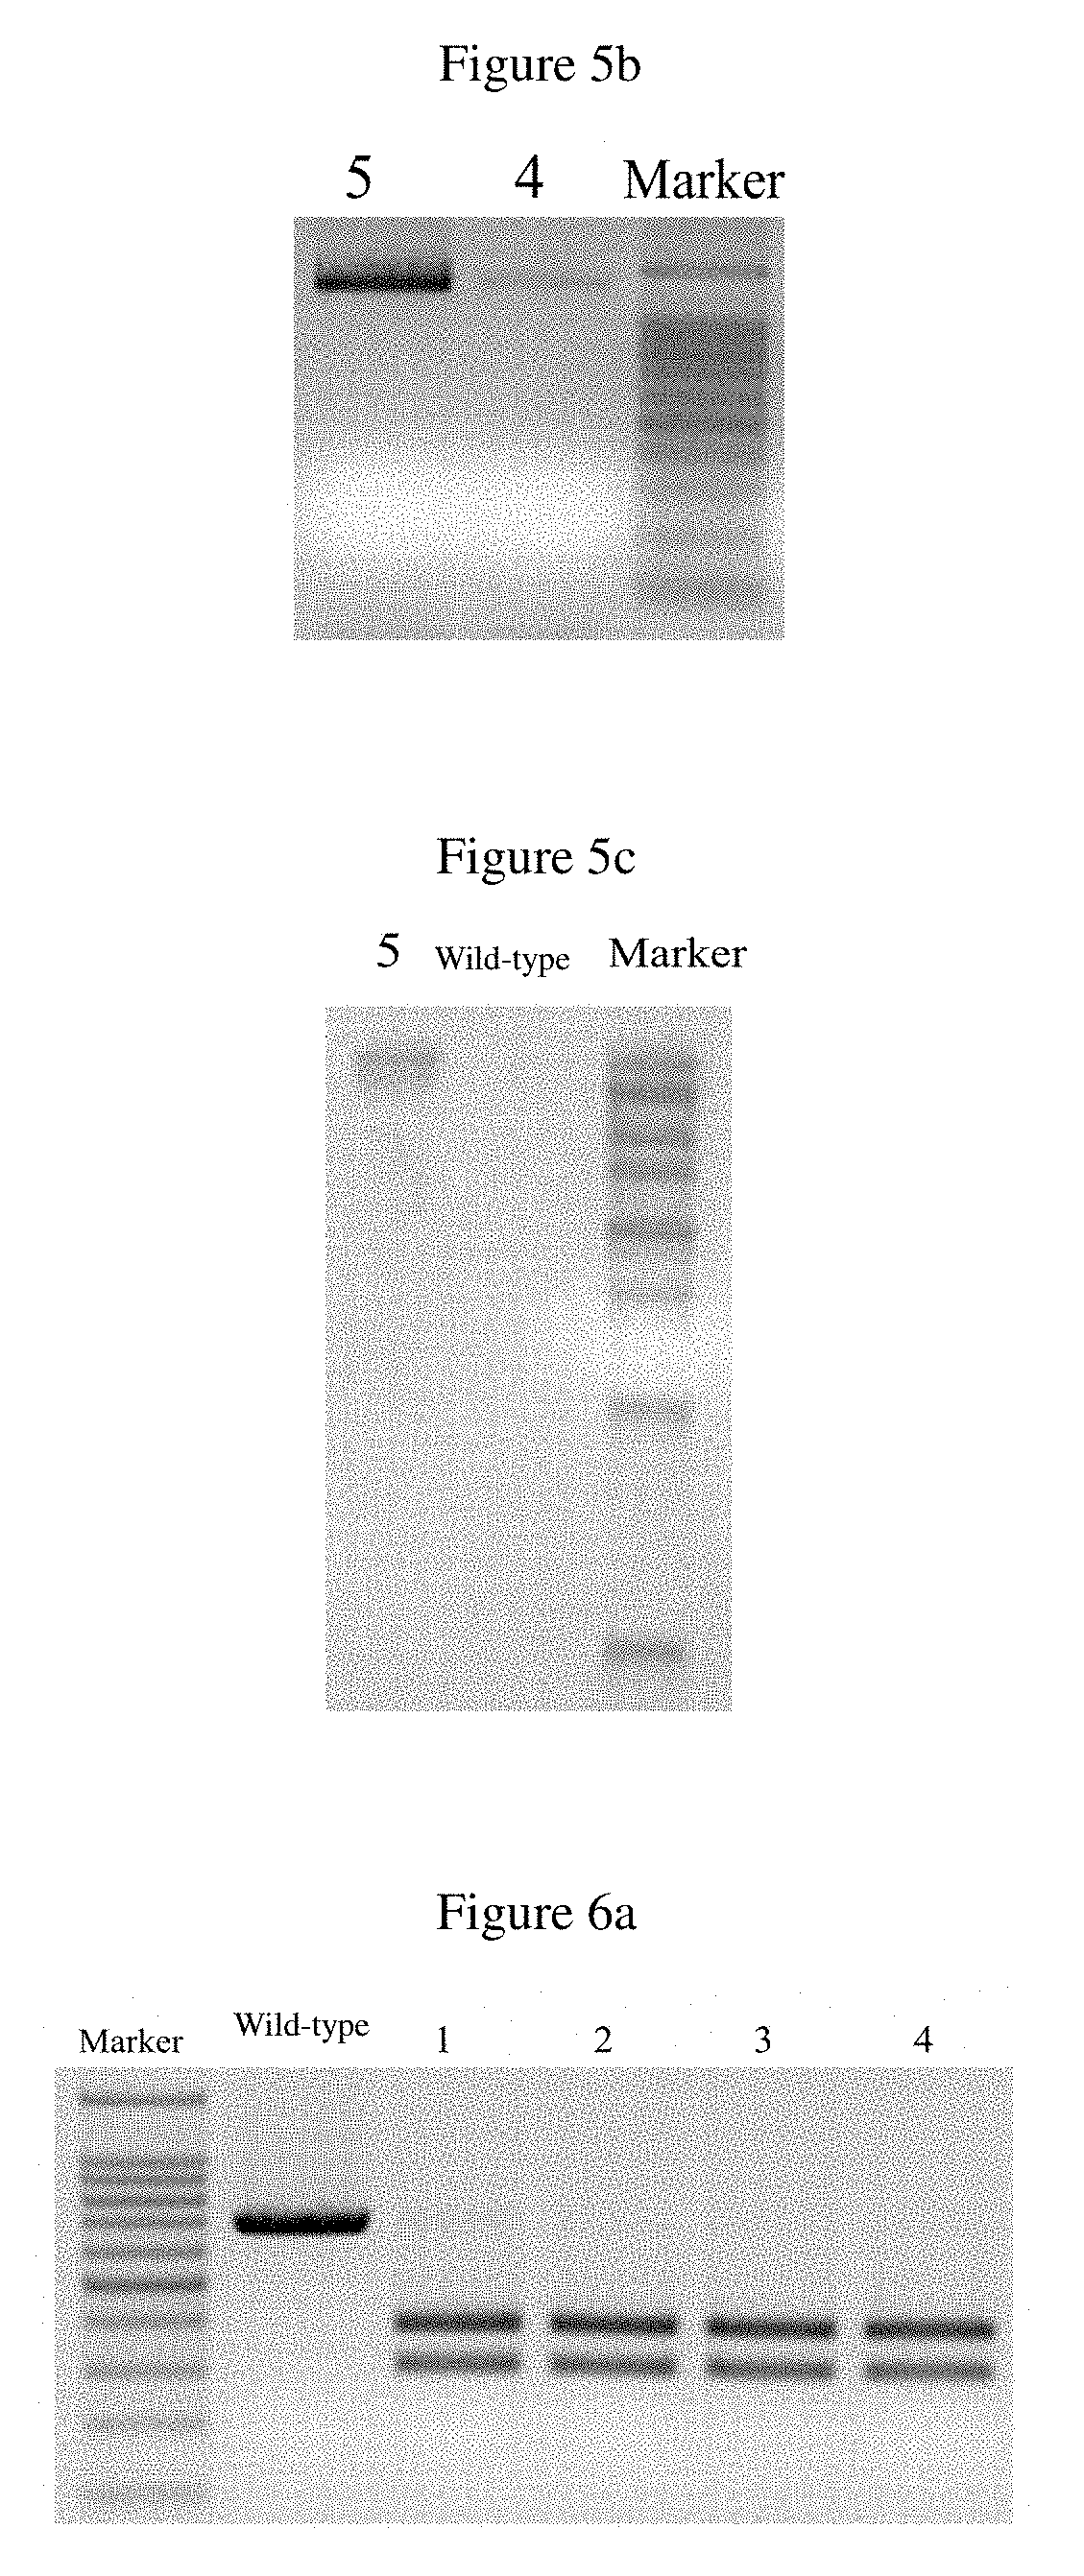 Preparation method for Anti-porcine reproductive and respiratory syndrome cloned pig